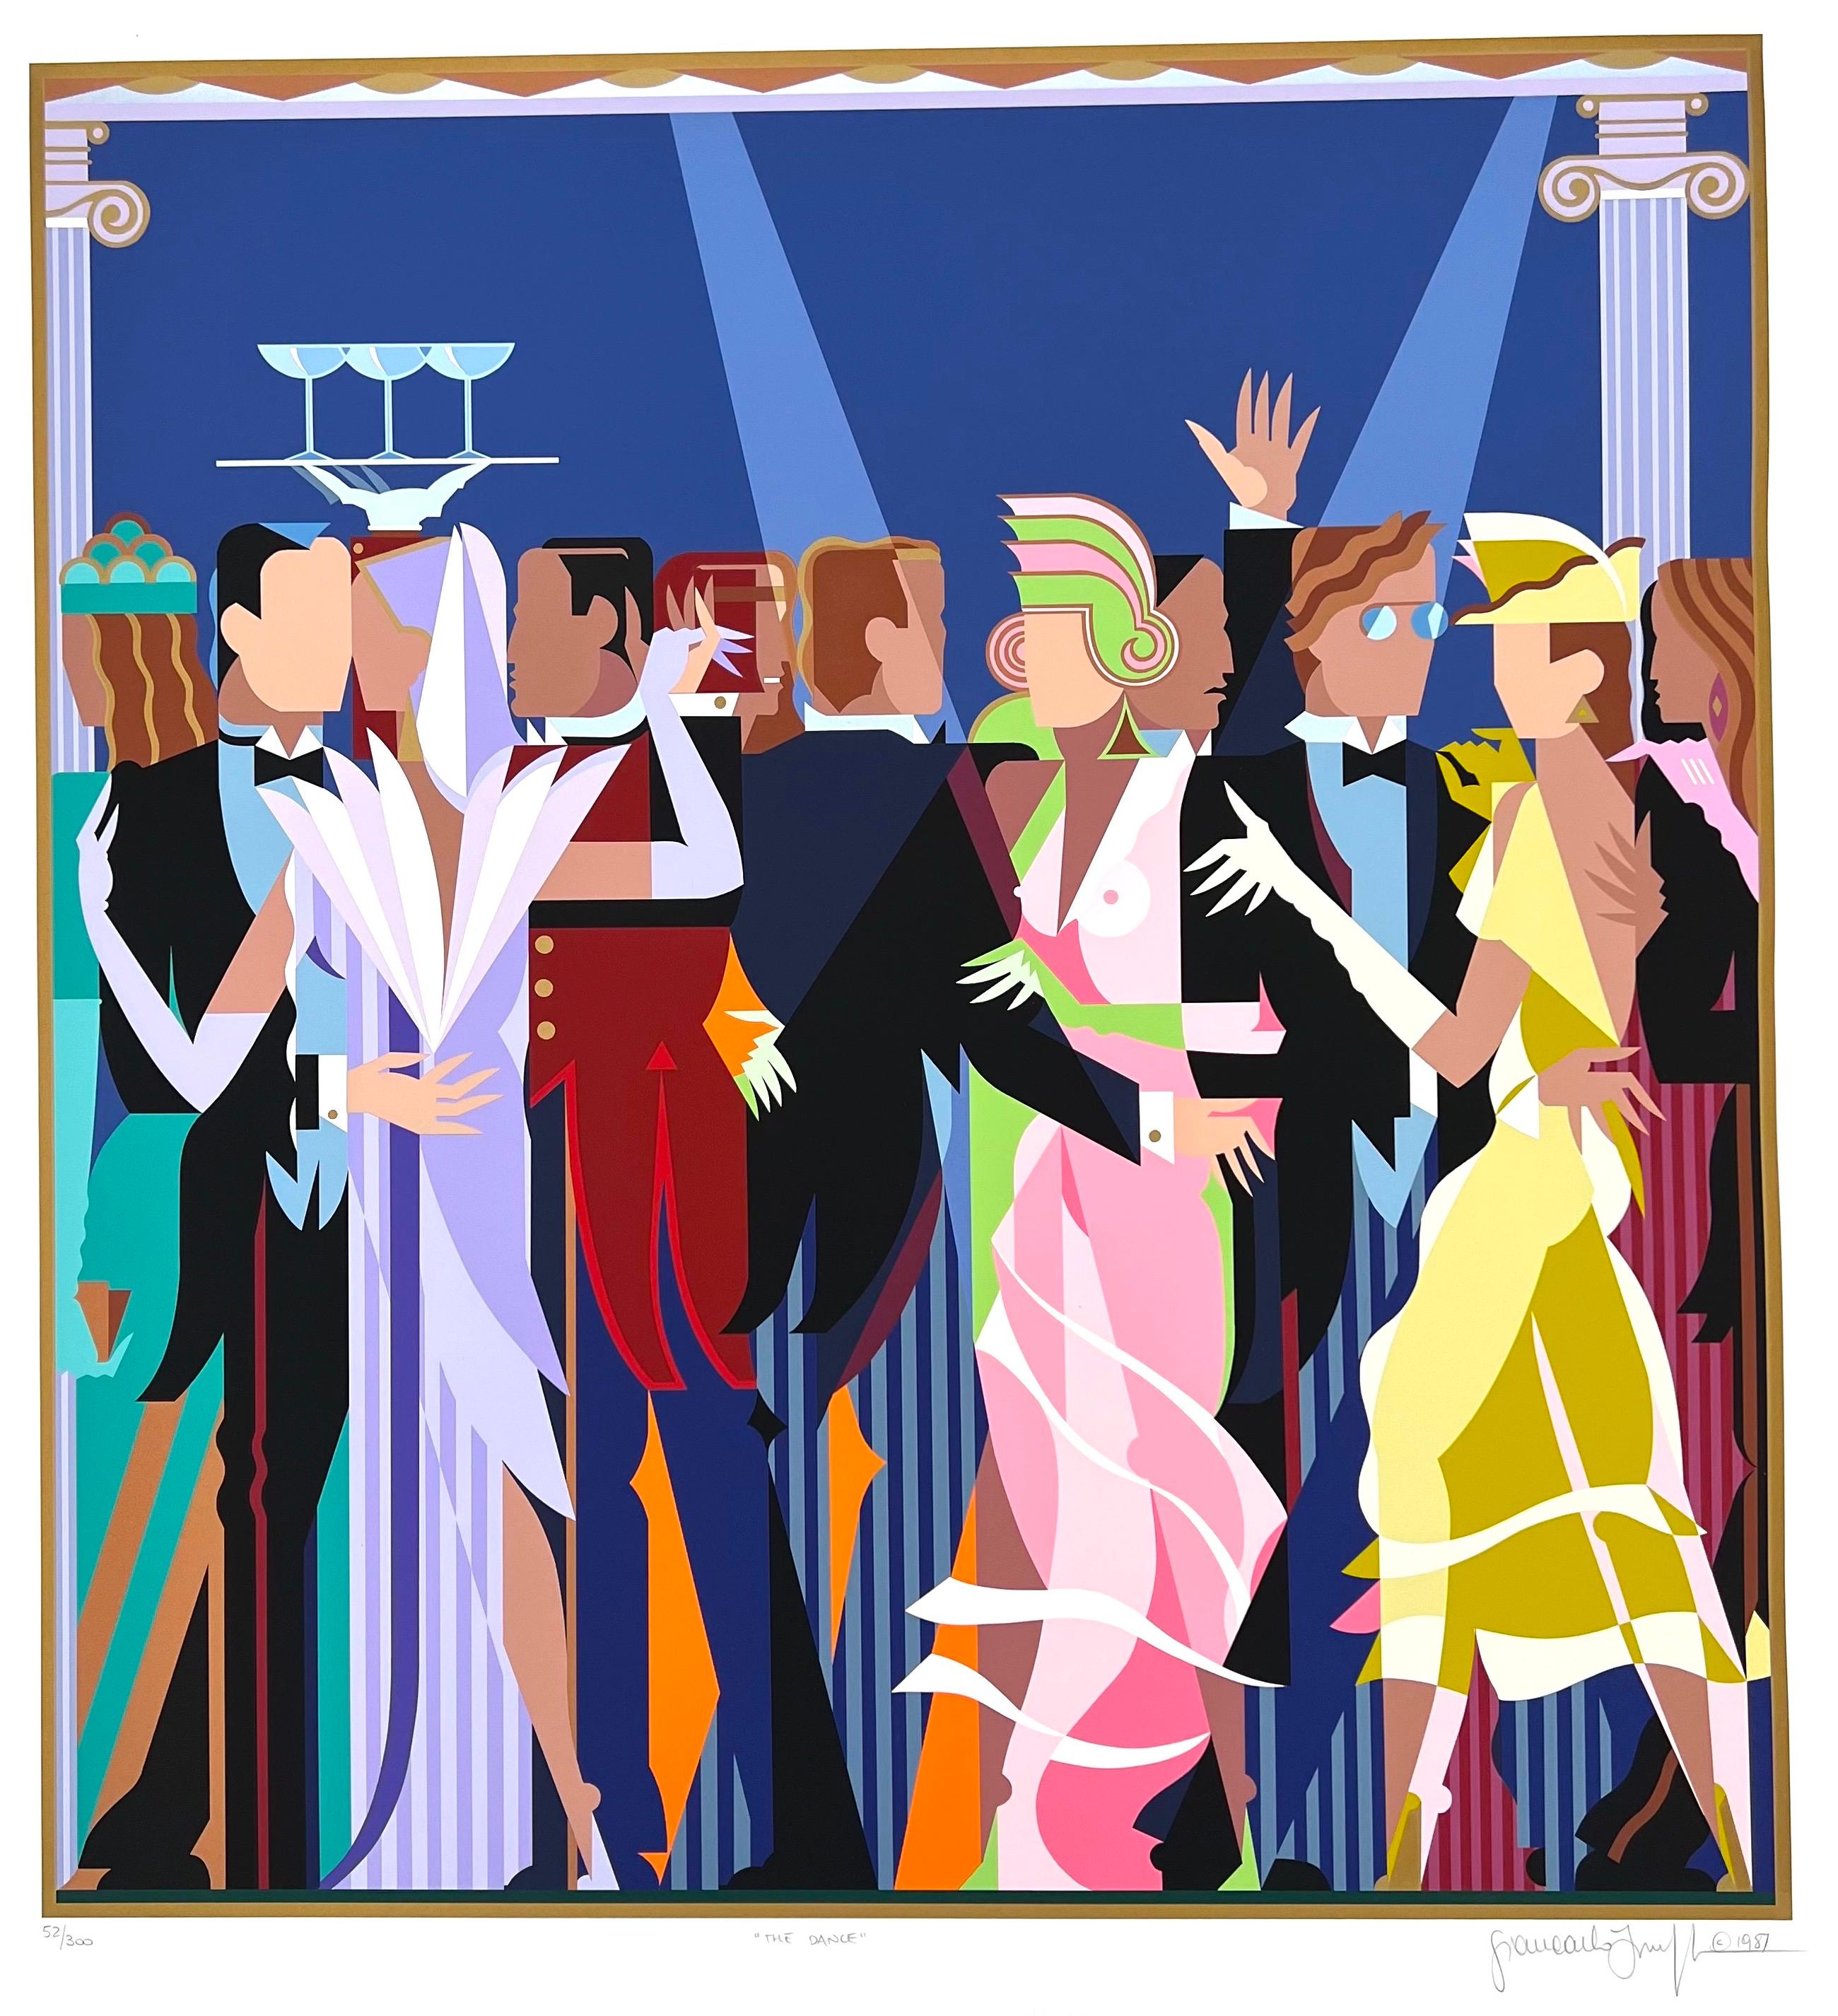 Rare serigraph "The Dance" from the Cafe Society series